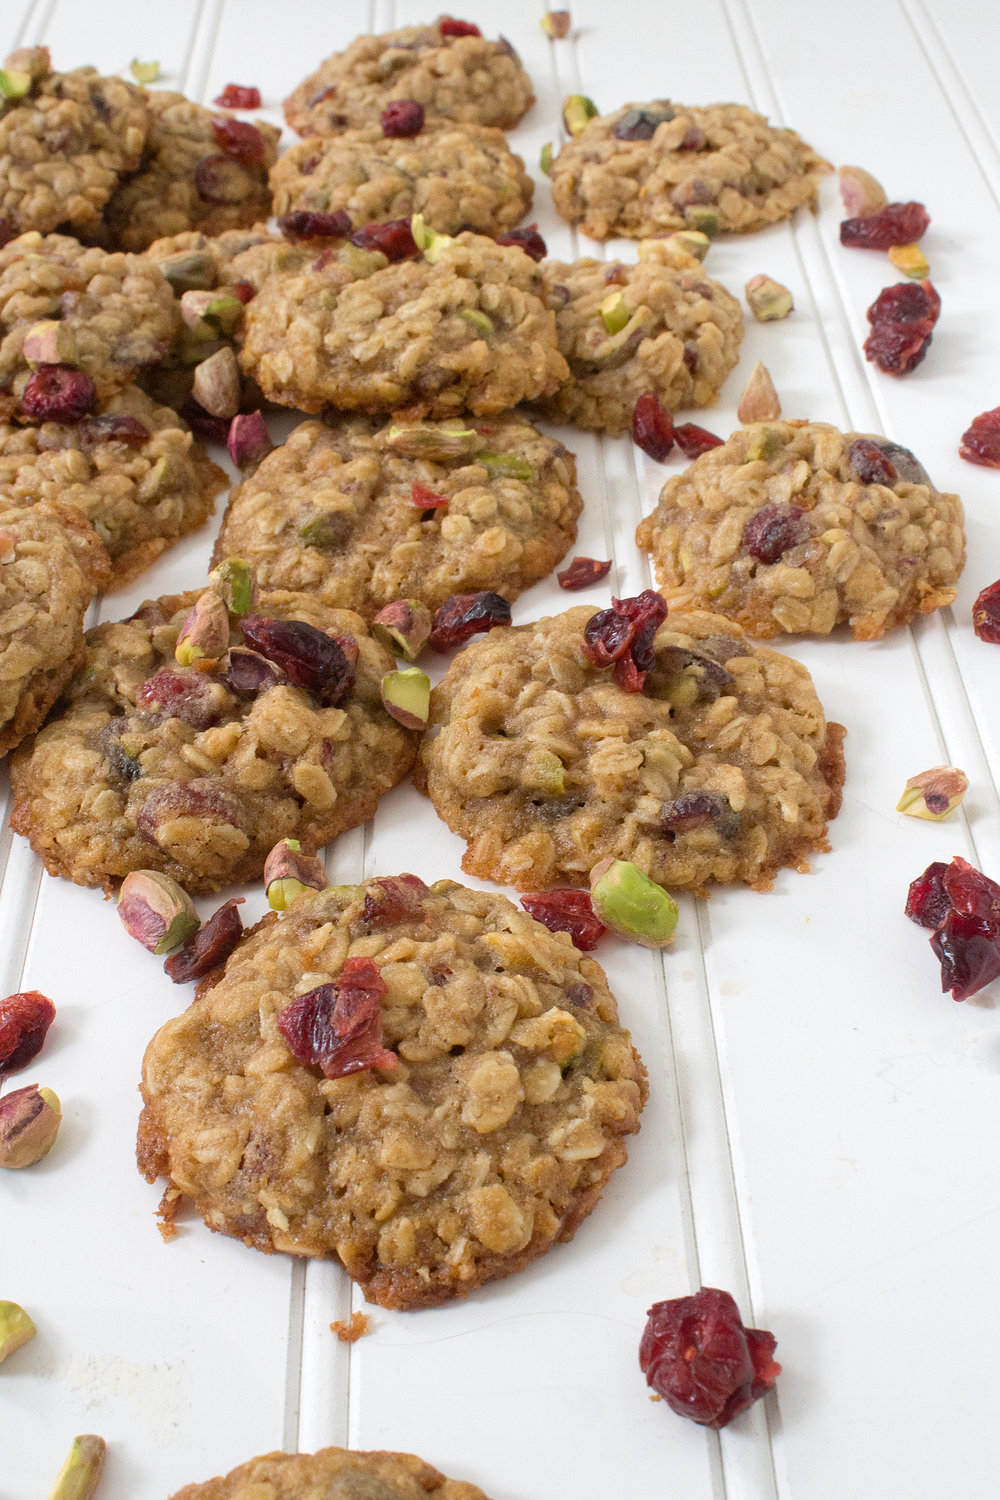 The perfect sweet + salty cookie: Oatmeal Cookies with Pistachios and Dried Cranberries. Get the recipe: Unusuallylovely.com